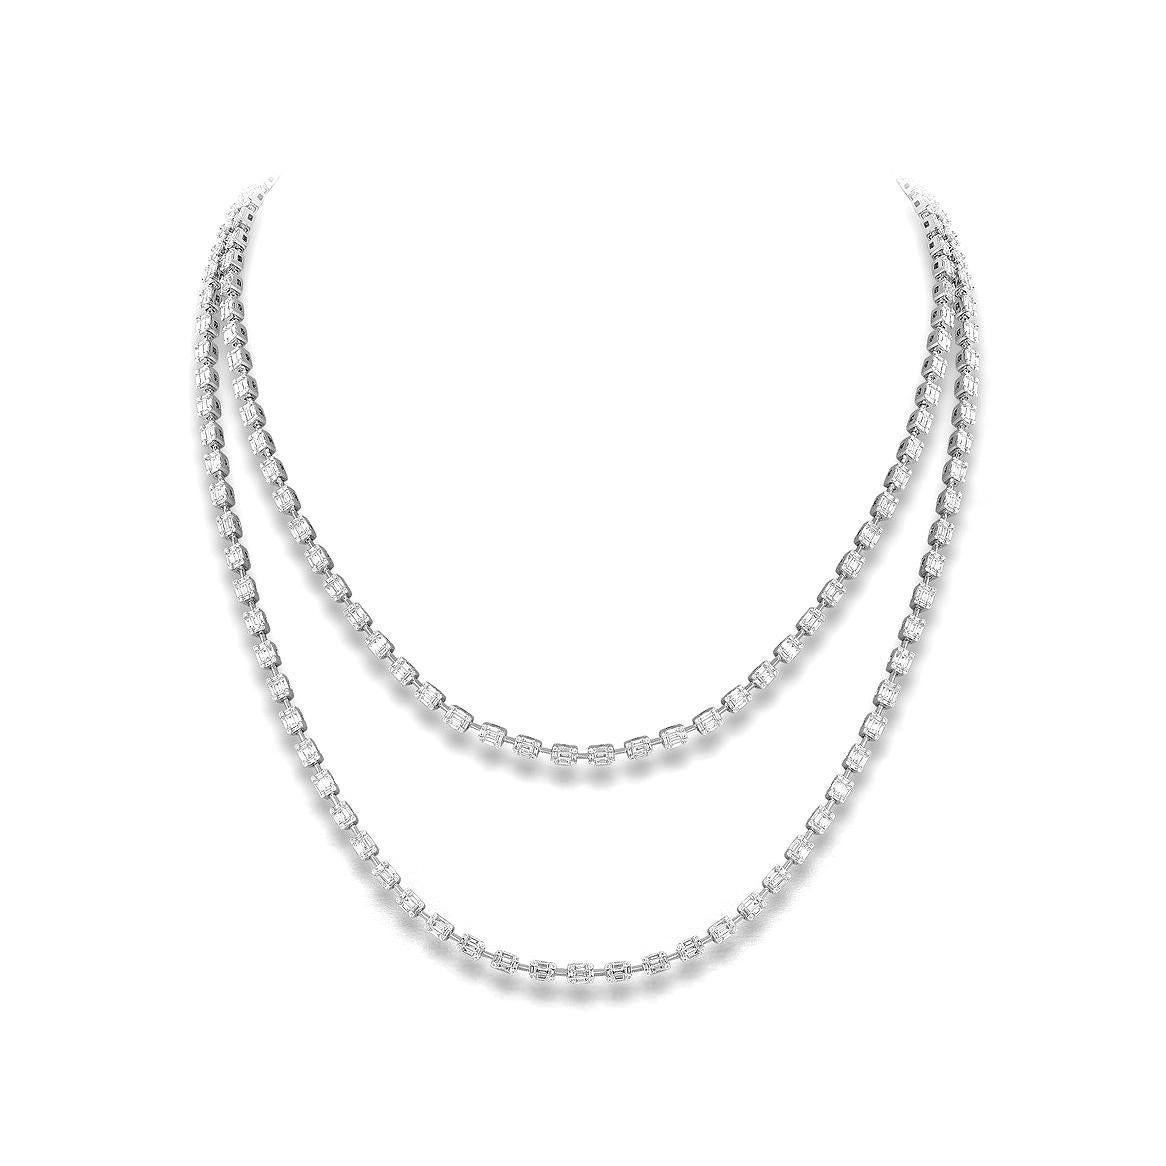 Necklace in 18kt white gold set with 800 baguette cut diamond 9.57 cts and 640 diamonds 1.88 cts (102 cm)               